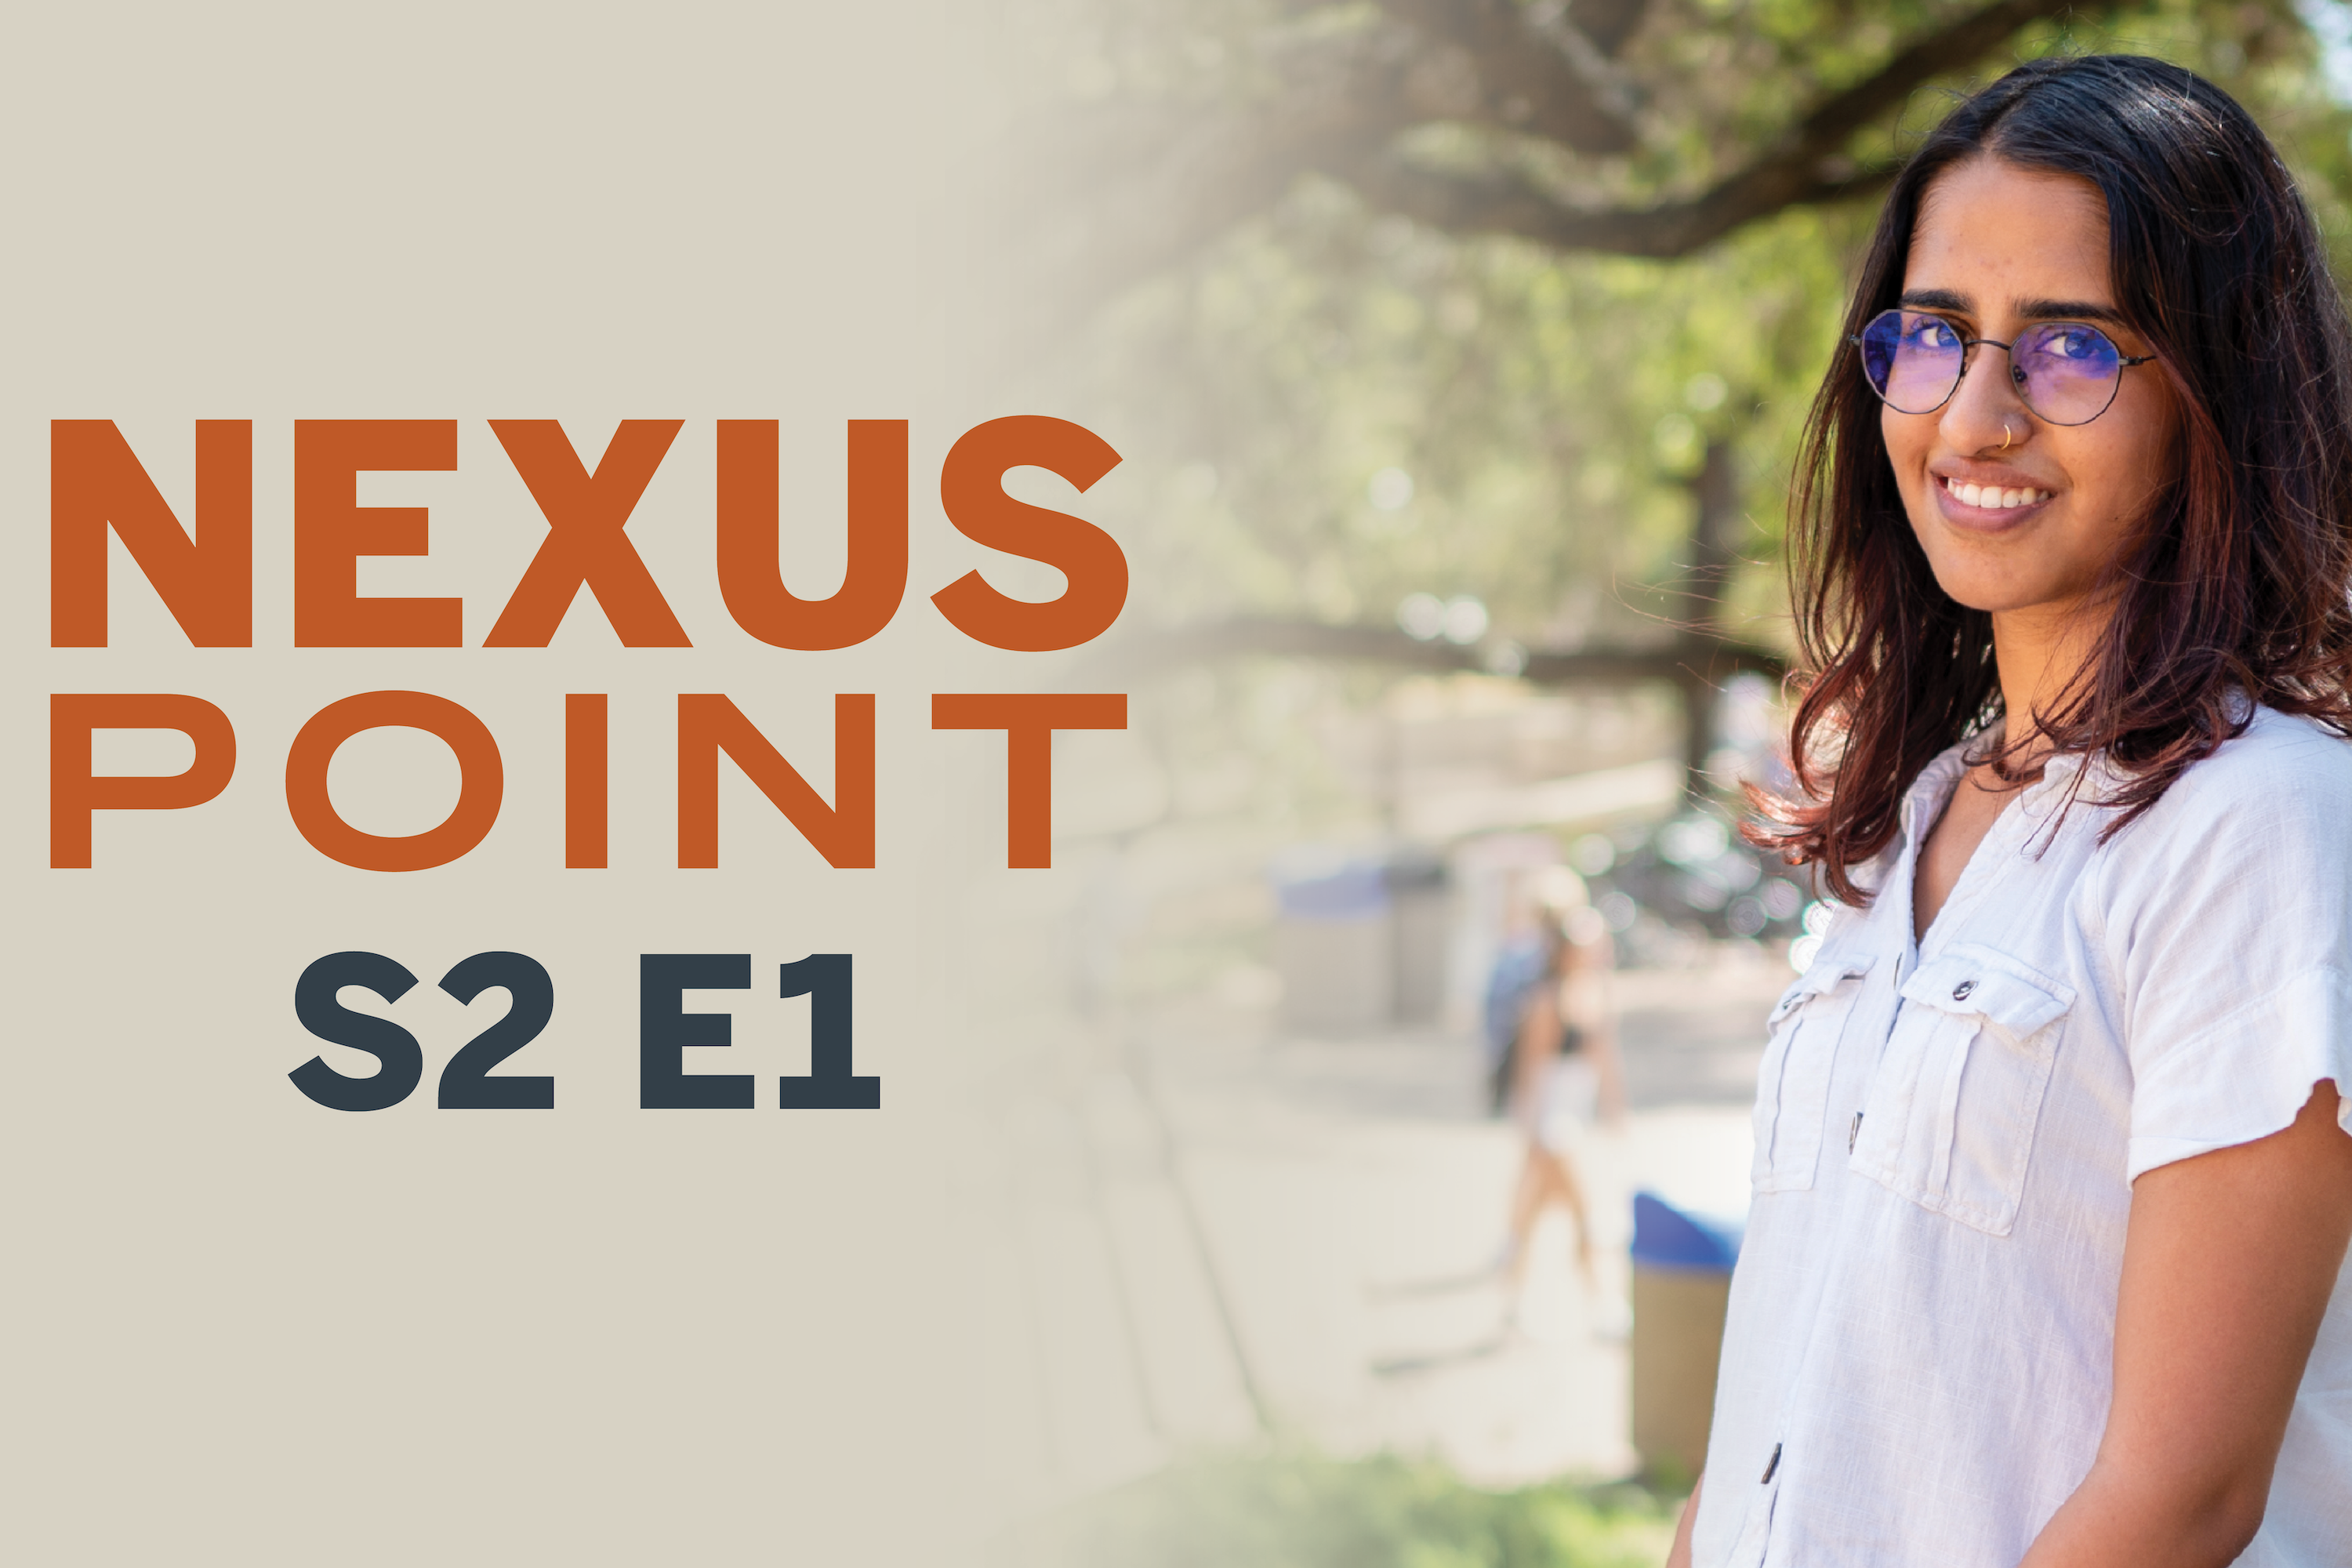 "Nexus Point S2 E1" appears next to an image of a young woman smiling in short sleeves and glasses underneath a live oak tree on the UT campus